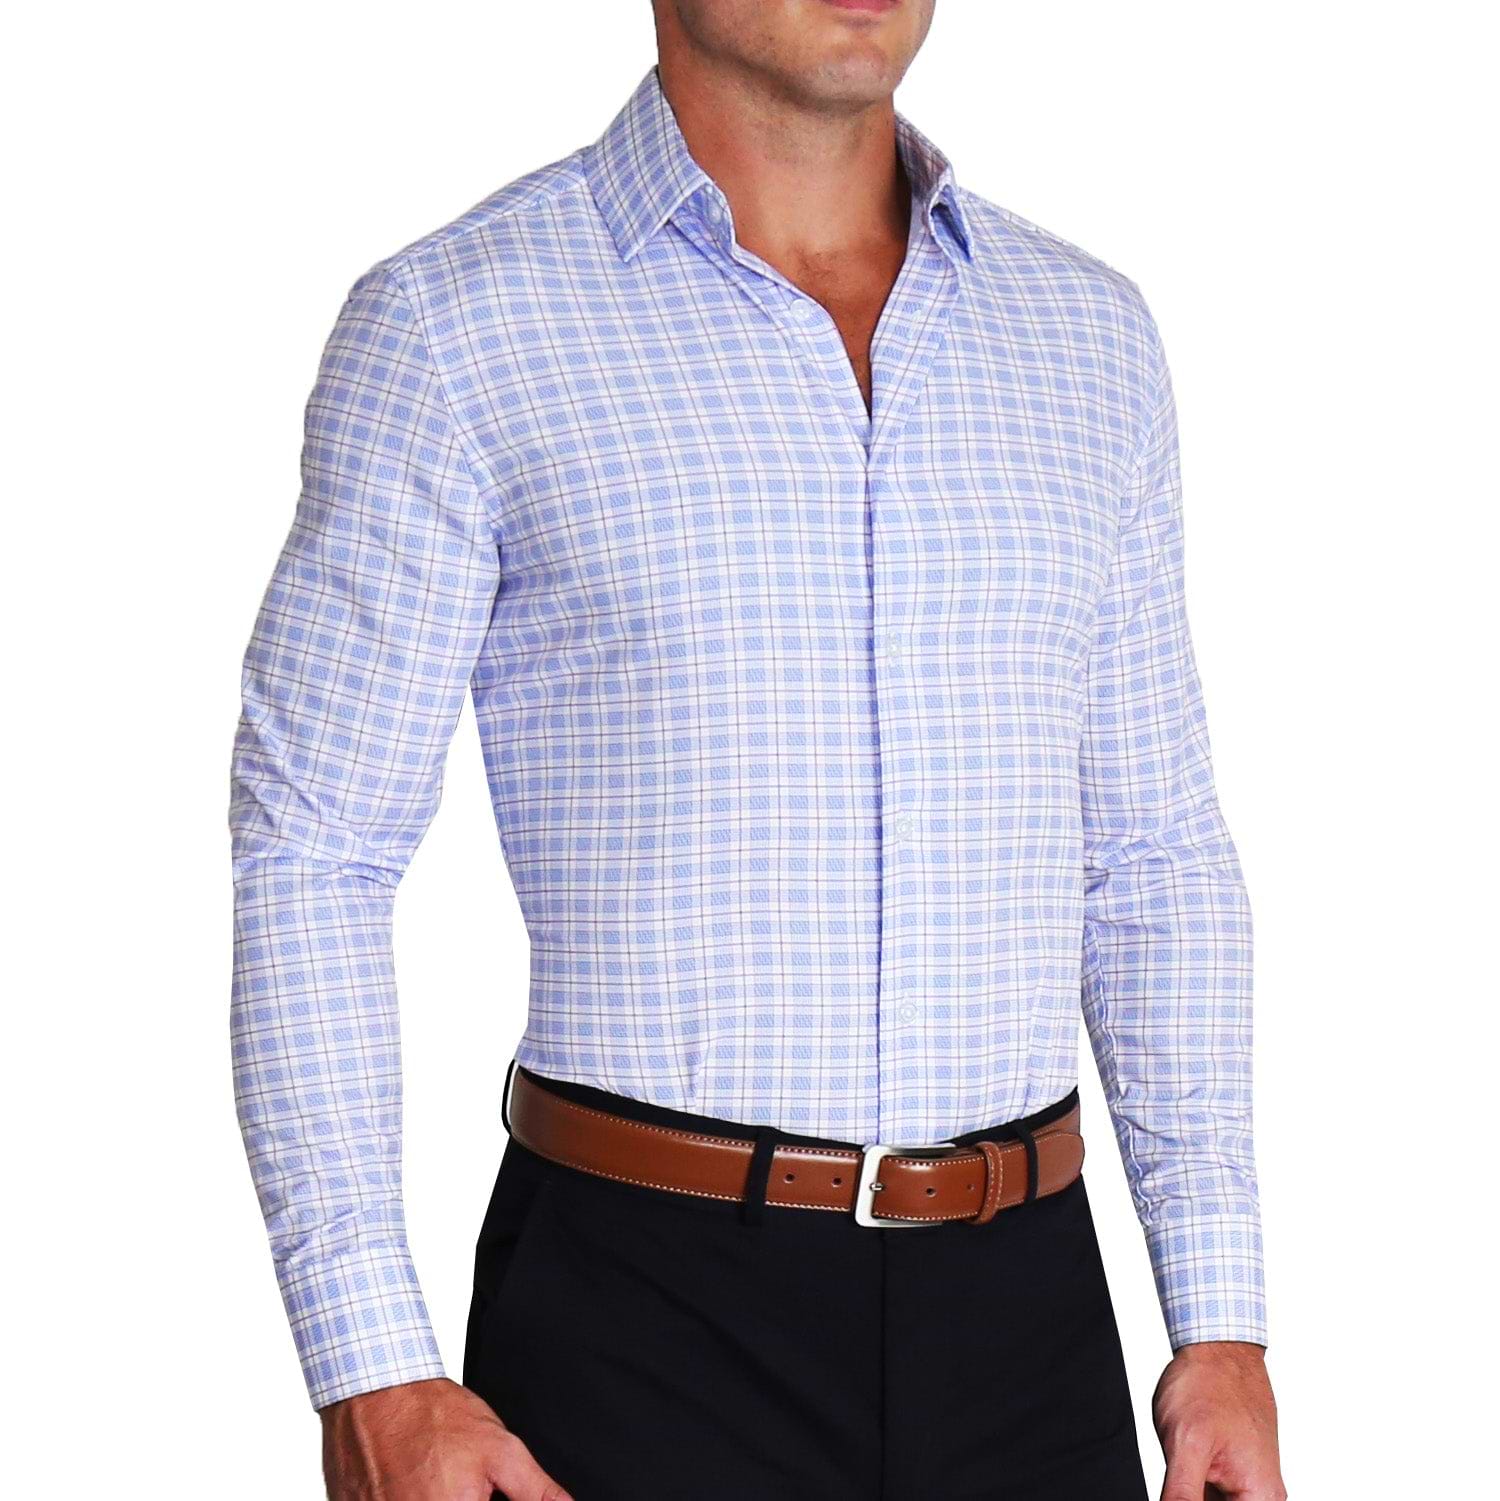 "The Baron" Purple and Blue Plaid - Classic Fit